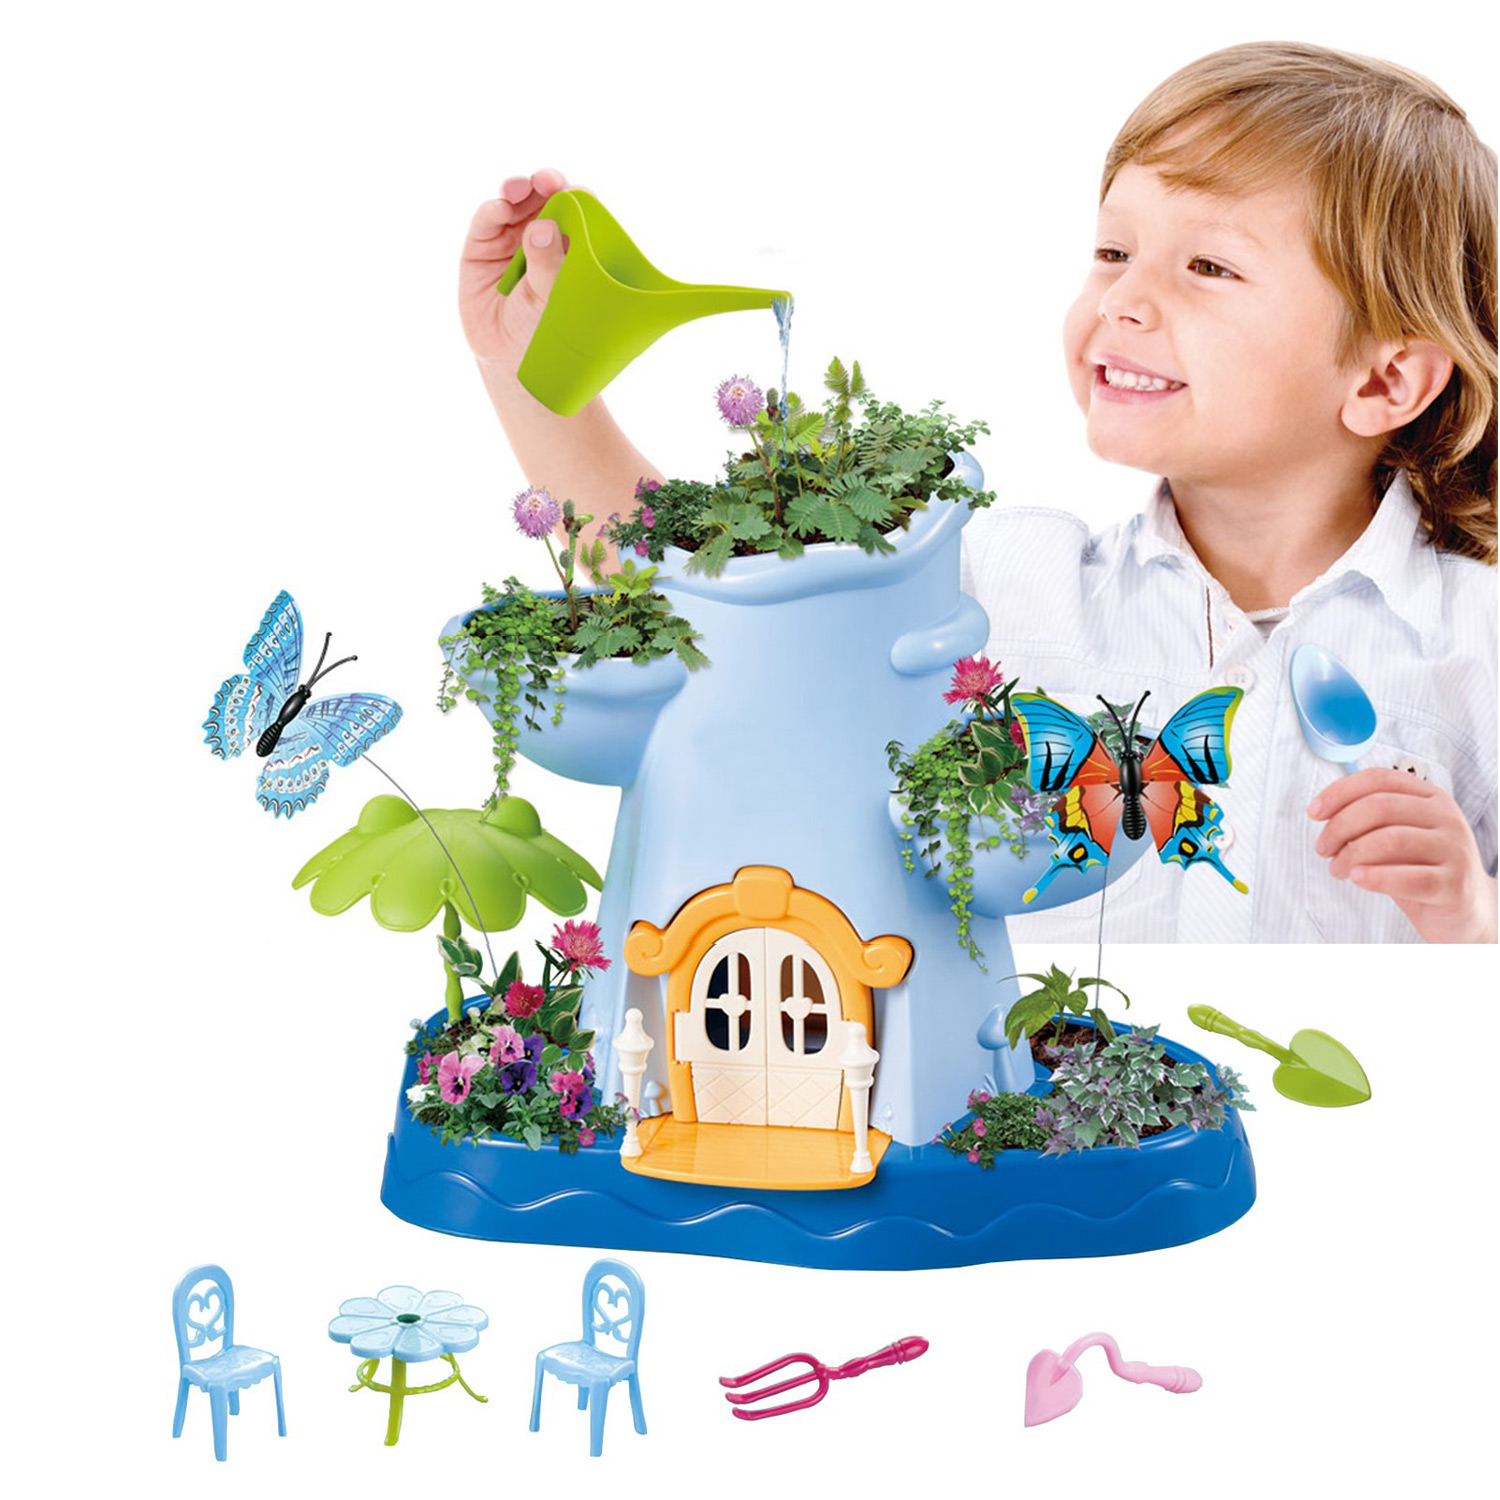 Kids Magical Garden Growing Kit Includes Everything You Need Tools Flower Plant Tree Interactive Play Fairy Toys Inspires Learning Gardening and Horticulture Educational Perfect For Children Girls Boys